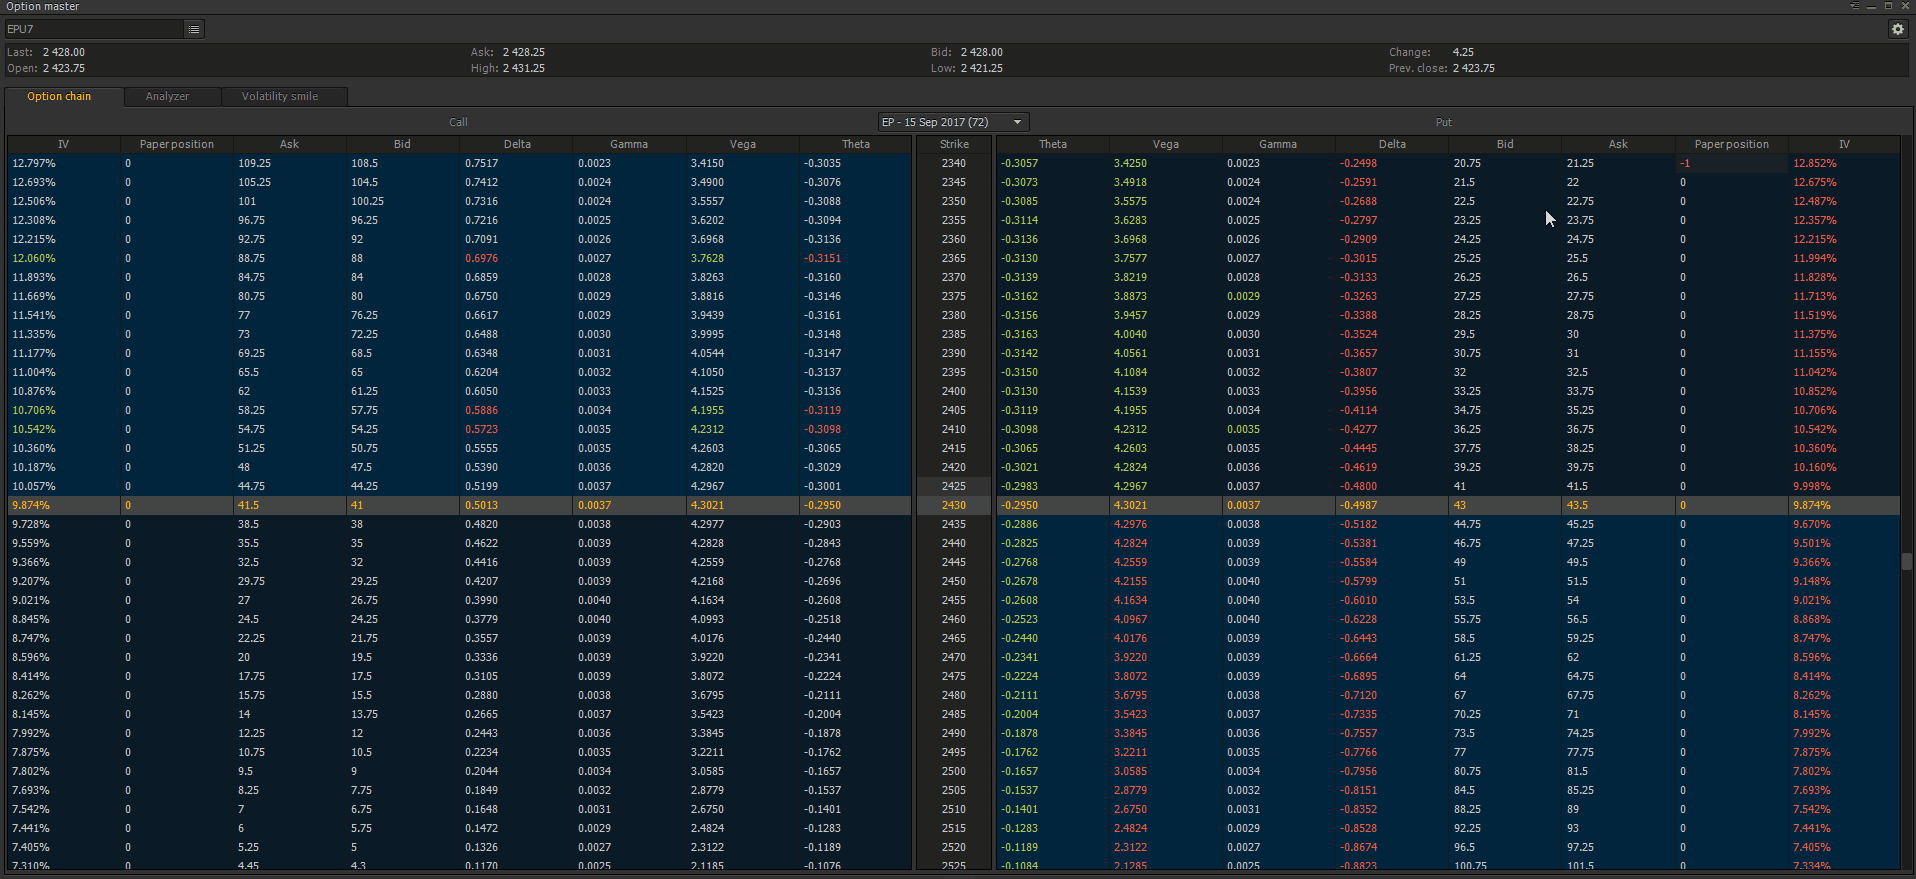 new coloring scheme into option master - by Historical volatility